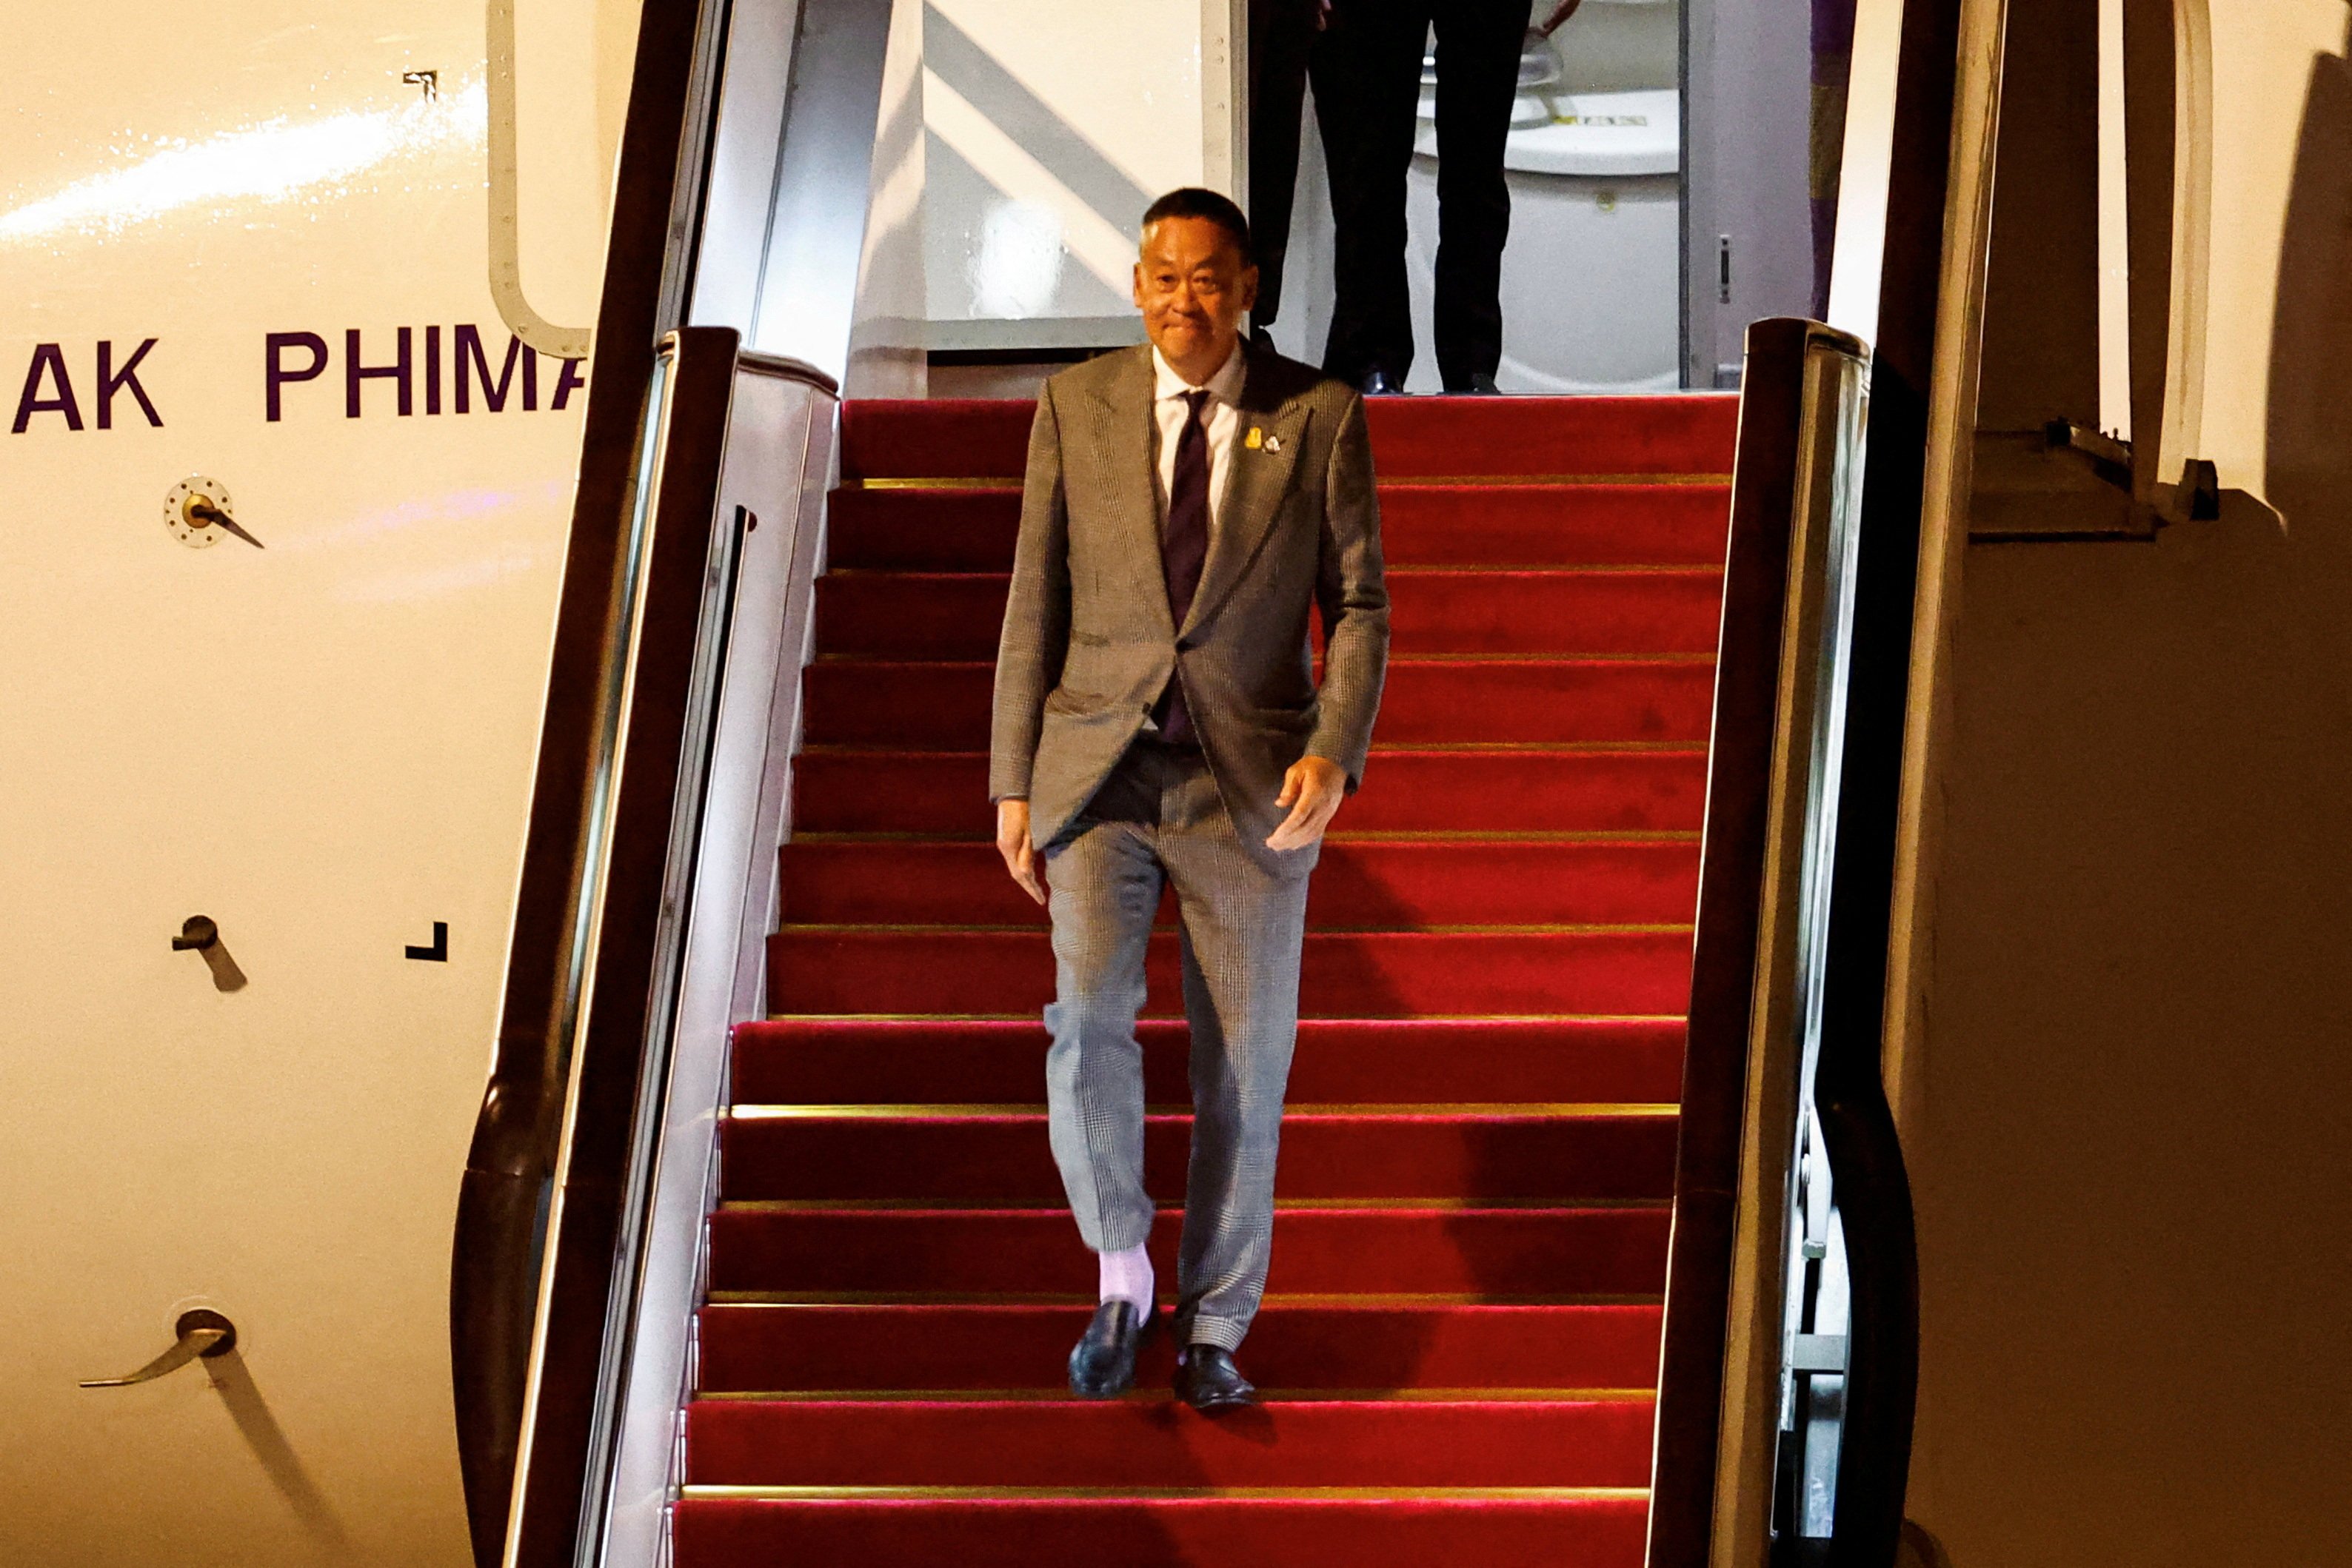 Thailand’s Prime Minister Srettha Thavisin arrives at Beijing Capital International Airport to attend the Third Belt and Road Forum in China on Monday. Photo: Reuters/Pool